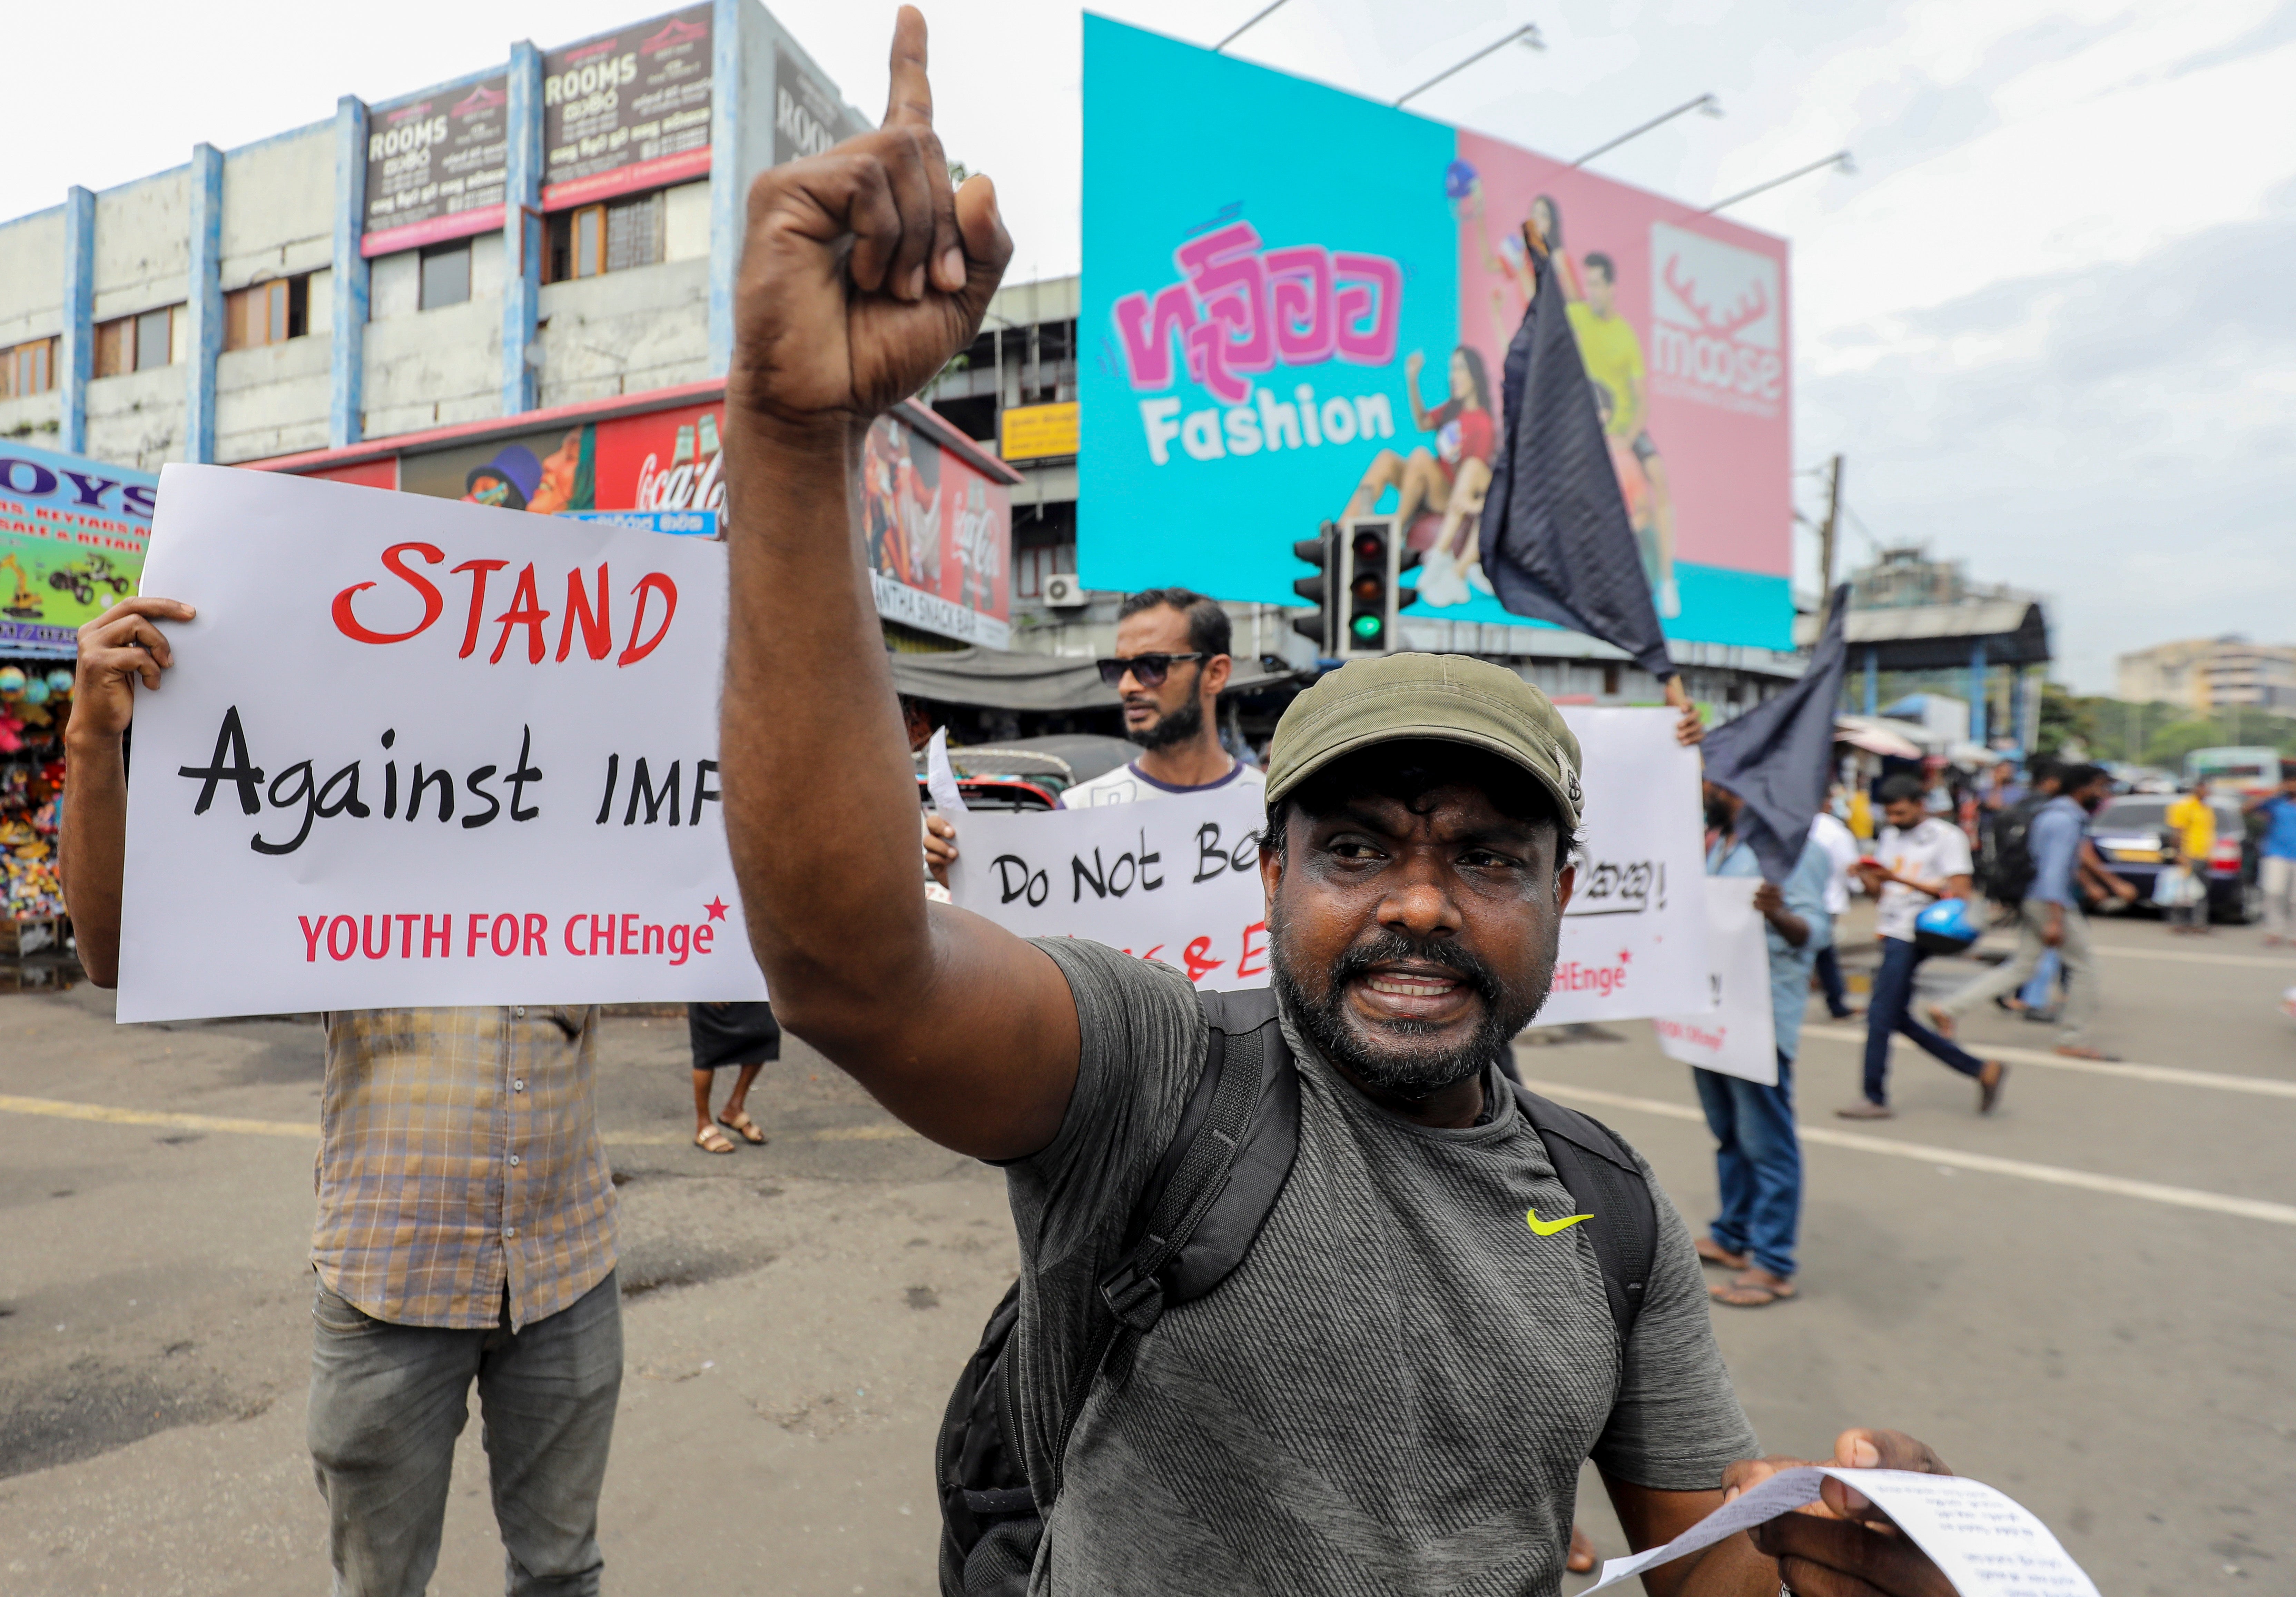 Sri Lanka’s deal with IMF has triggered angry protests – but could be passed by parliament on Saturday